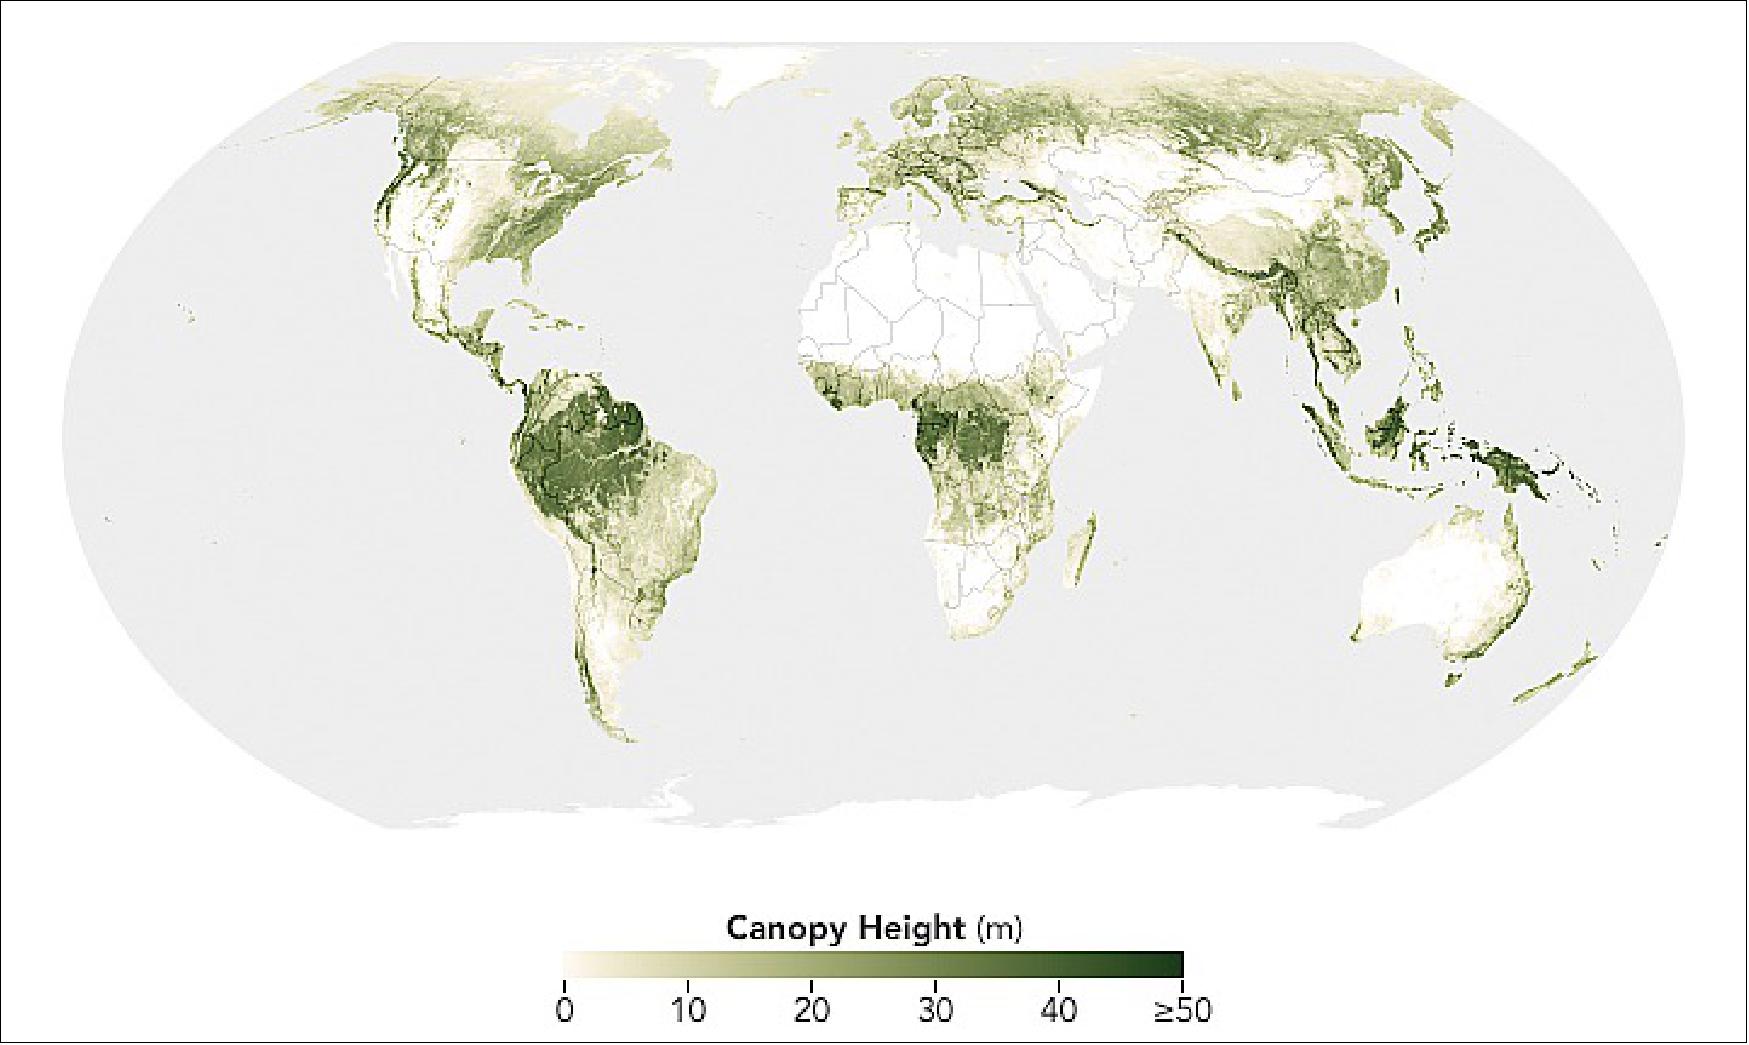 Figure 7: The map shows the height of Earth's forests, from stubby saplings to timbers towering more than 50 meters tall. It reveals some patterns you might expect, such as taller forests hugging the equator in the Amazon, central Africa, and Indonesia. But tall trees show up outside the tropics, too. For example, giant sequoias in California can grow to nearly 80 meters (260 feet) tall; Bhutan pines in the eastern Himalayas reach similar heights, exceeding the scale of this map(image credit: NASA Earth Observatory images by Joshua Stevens, using data courtesy of Lang, N. et al. (2022). Story by Kathryn Hansen)